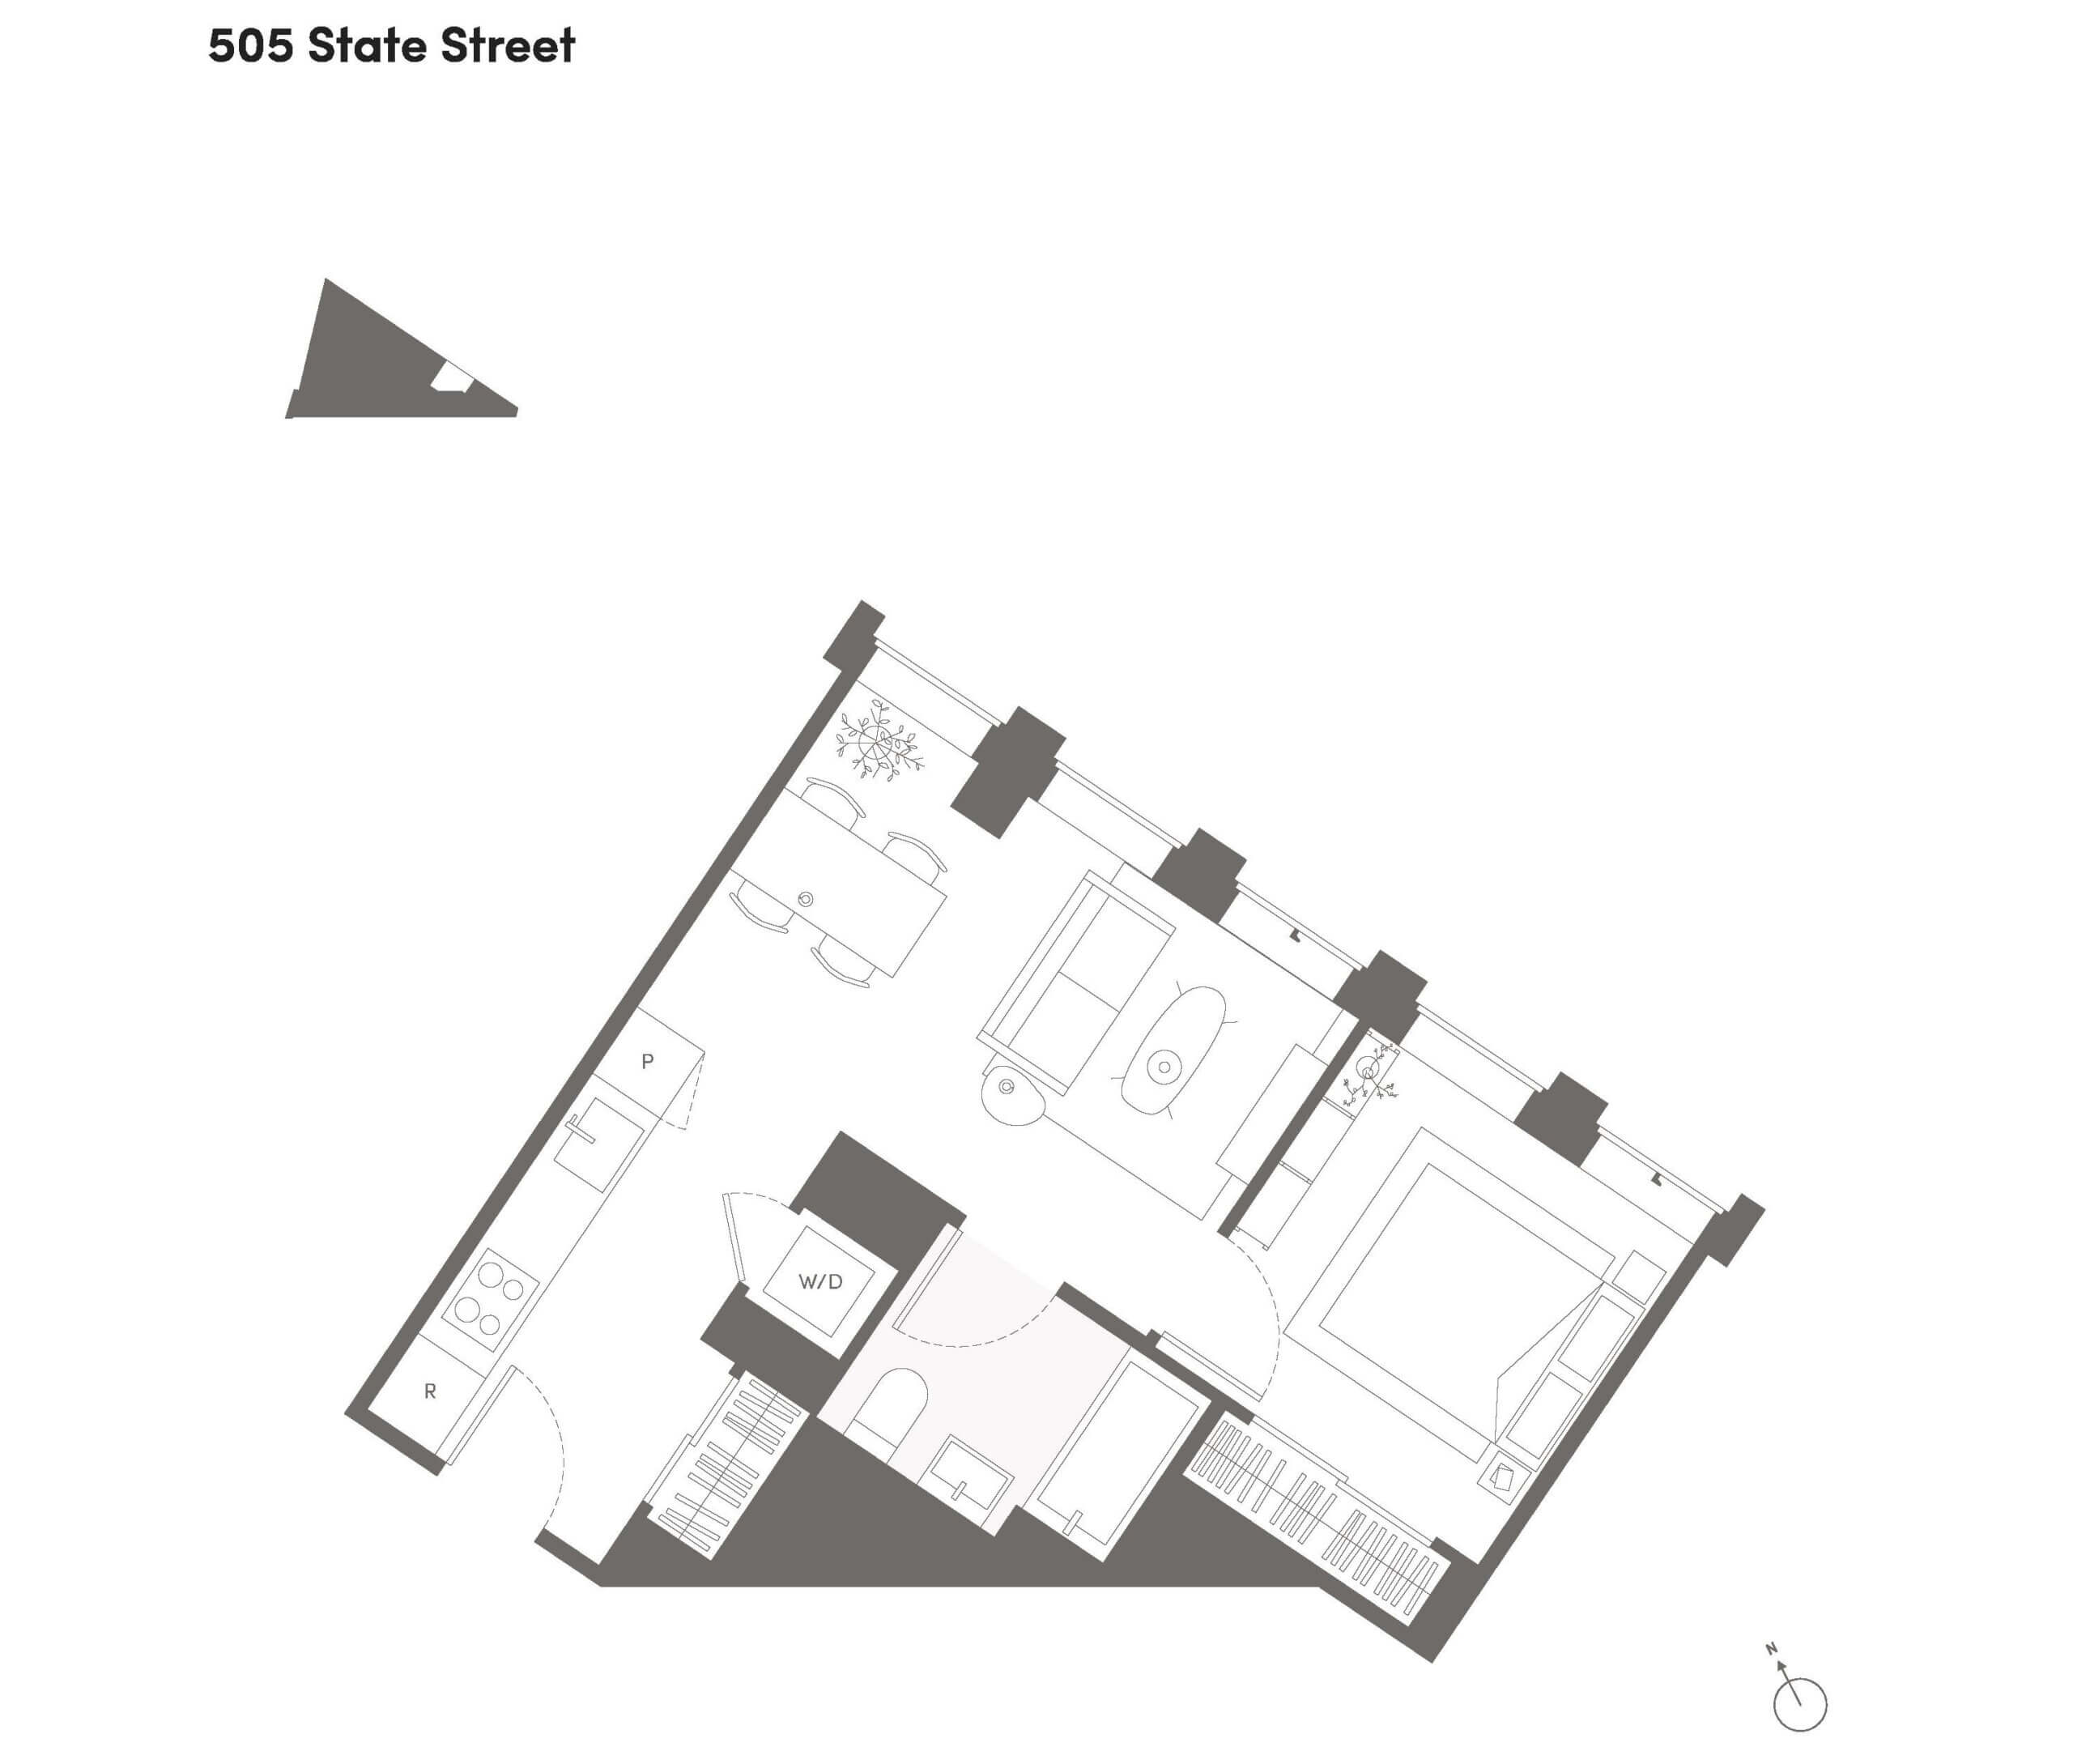 floor plan of a one bedroom unit with windows in living room and bedroom